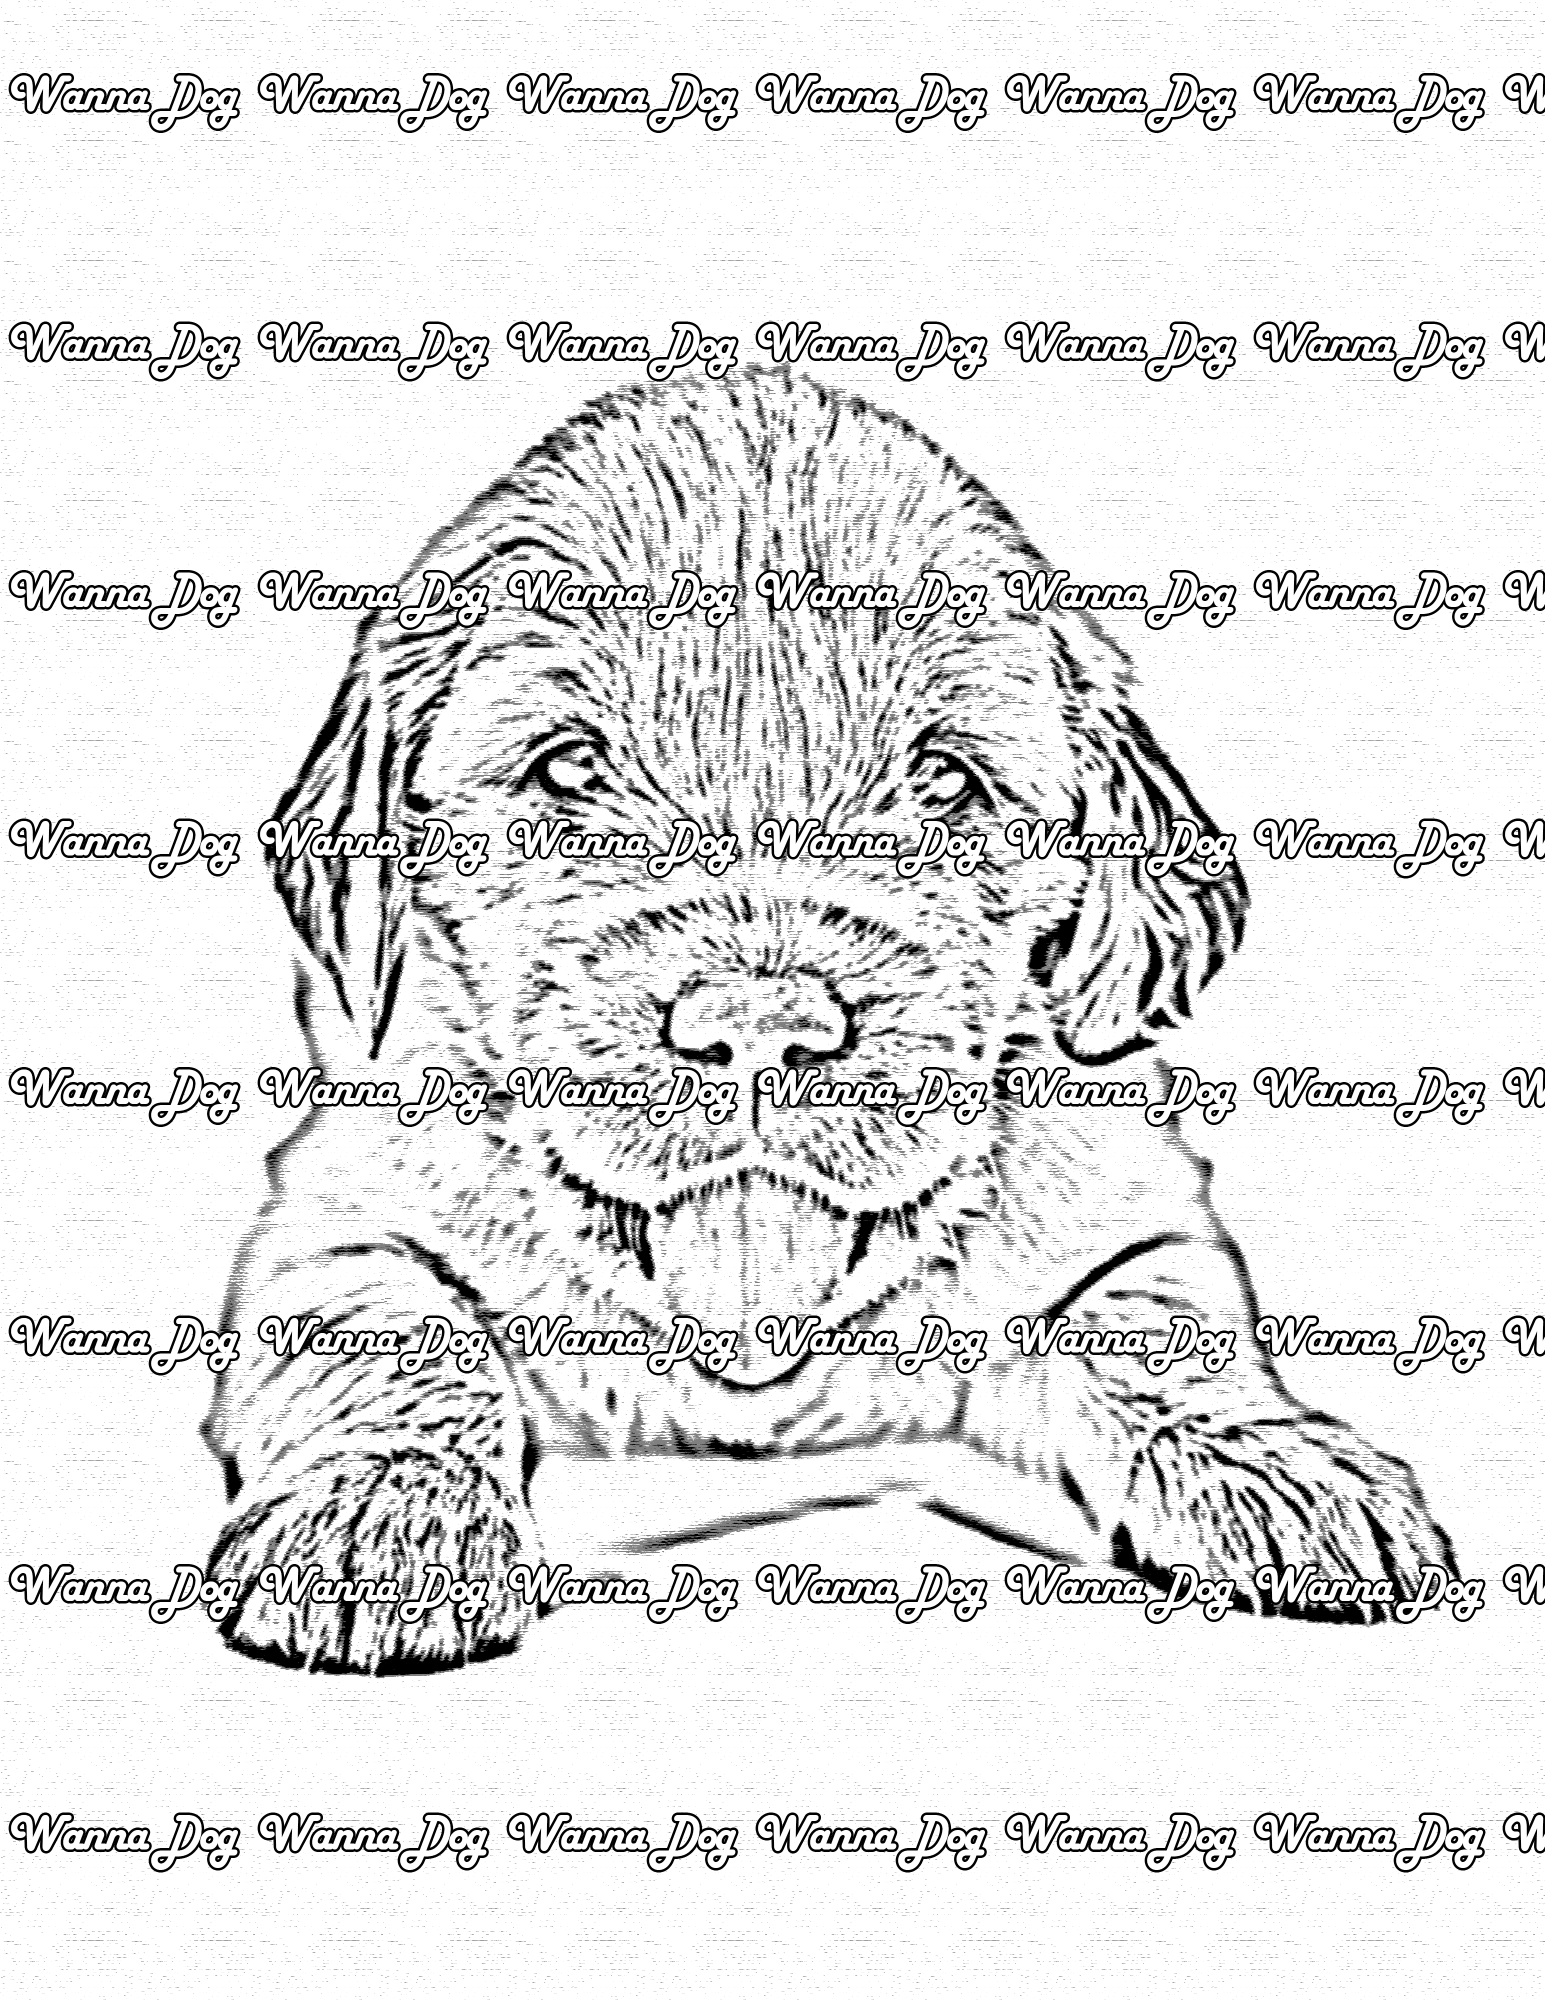 Golden Retriever Puppy Coloring Page of a Golden Retriever Puppy laying down, looking at the camera with their tongue out